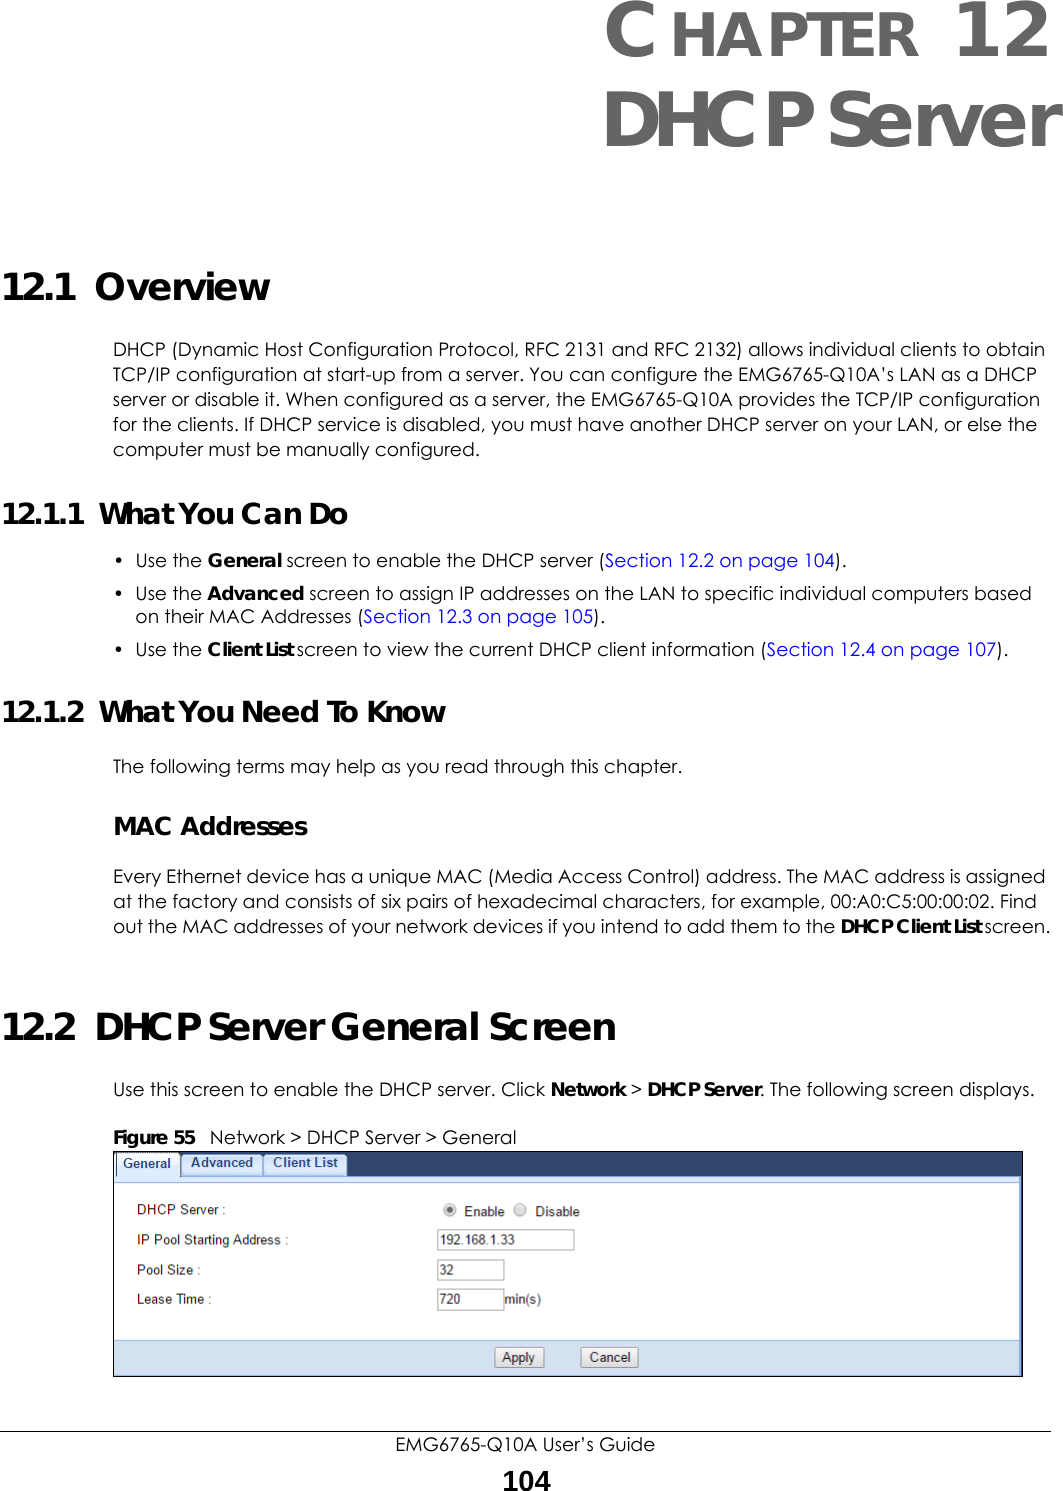 EMG6765-Q10A User’s Guide104CHAPTER 12DHCP Server12.1  OverviewDHCP (Dynamic Host Configuration Protocol, RFC 2131 and RFC 2132) allows individual clients to obtain TCP/IP configuration at start-up from a server. You can configure the EMG6765-Q10A’s LAN as a DHCP server or disable it. When configured as a server, the EMG6765-Q10A provides the TCP/IP configuration for the clients. If DHCP service is disabled, you must have another DHCP server on your LAN, or else the computer must be manually configured.12.1.1  What You Can Do• Use the General screen to enable the DHCP server (Section 12.2 on page 104).• Use the Advanced screen to assign IP addresses on the LAN to specific individual computers based on their MAC Addresses (Section 12.3 on page 105).• Use the Client List screen to view the current DHCP client information (Section 12.4 on page 107). 12.1.2  What You Need To KnowThe following terms may help as you read through this chapter.MAC AddressesEvery Ethernet device has a unique MAC (Media Access Control) address. The MAC address is assigned at the factory and consists of six pairs of hexadecimal characters, for example, 00:A0:C5:00:00:02. Find out the MAC addresses of your network devices if you intend to add them to the DHCP Client List screen.12.2  DHCP Server General ScreenUse this screen to enable the DHCP server. Click Network &gt; DHCP Server. The following screen displays.Figure 55   Network &gt; DHCP Server &gt; General   